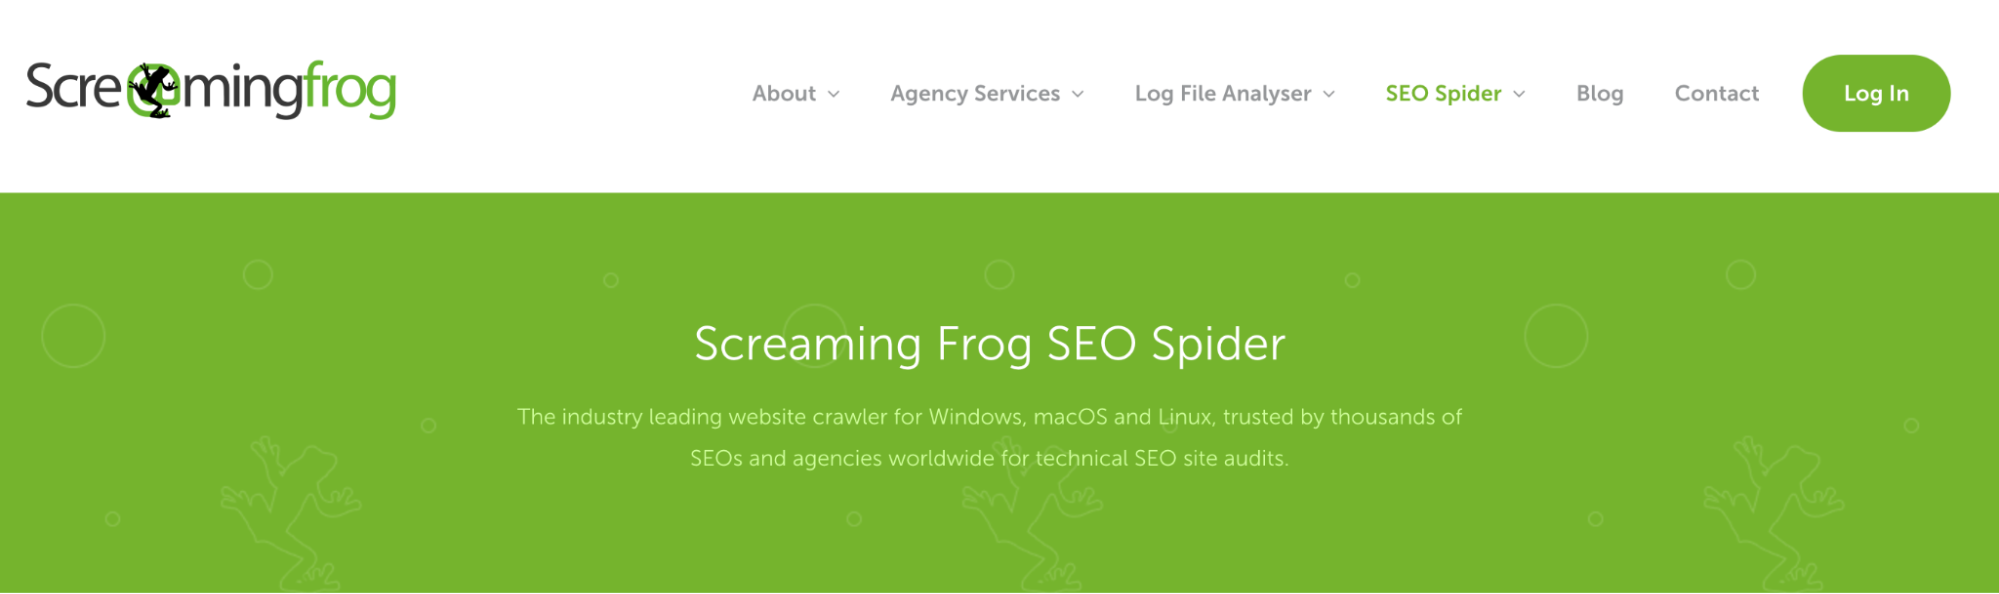 The homepage of Screaming Frog SEO Spider features a bright green header